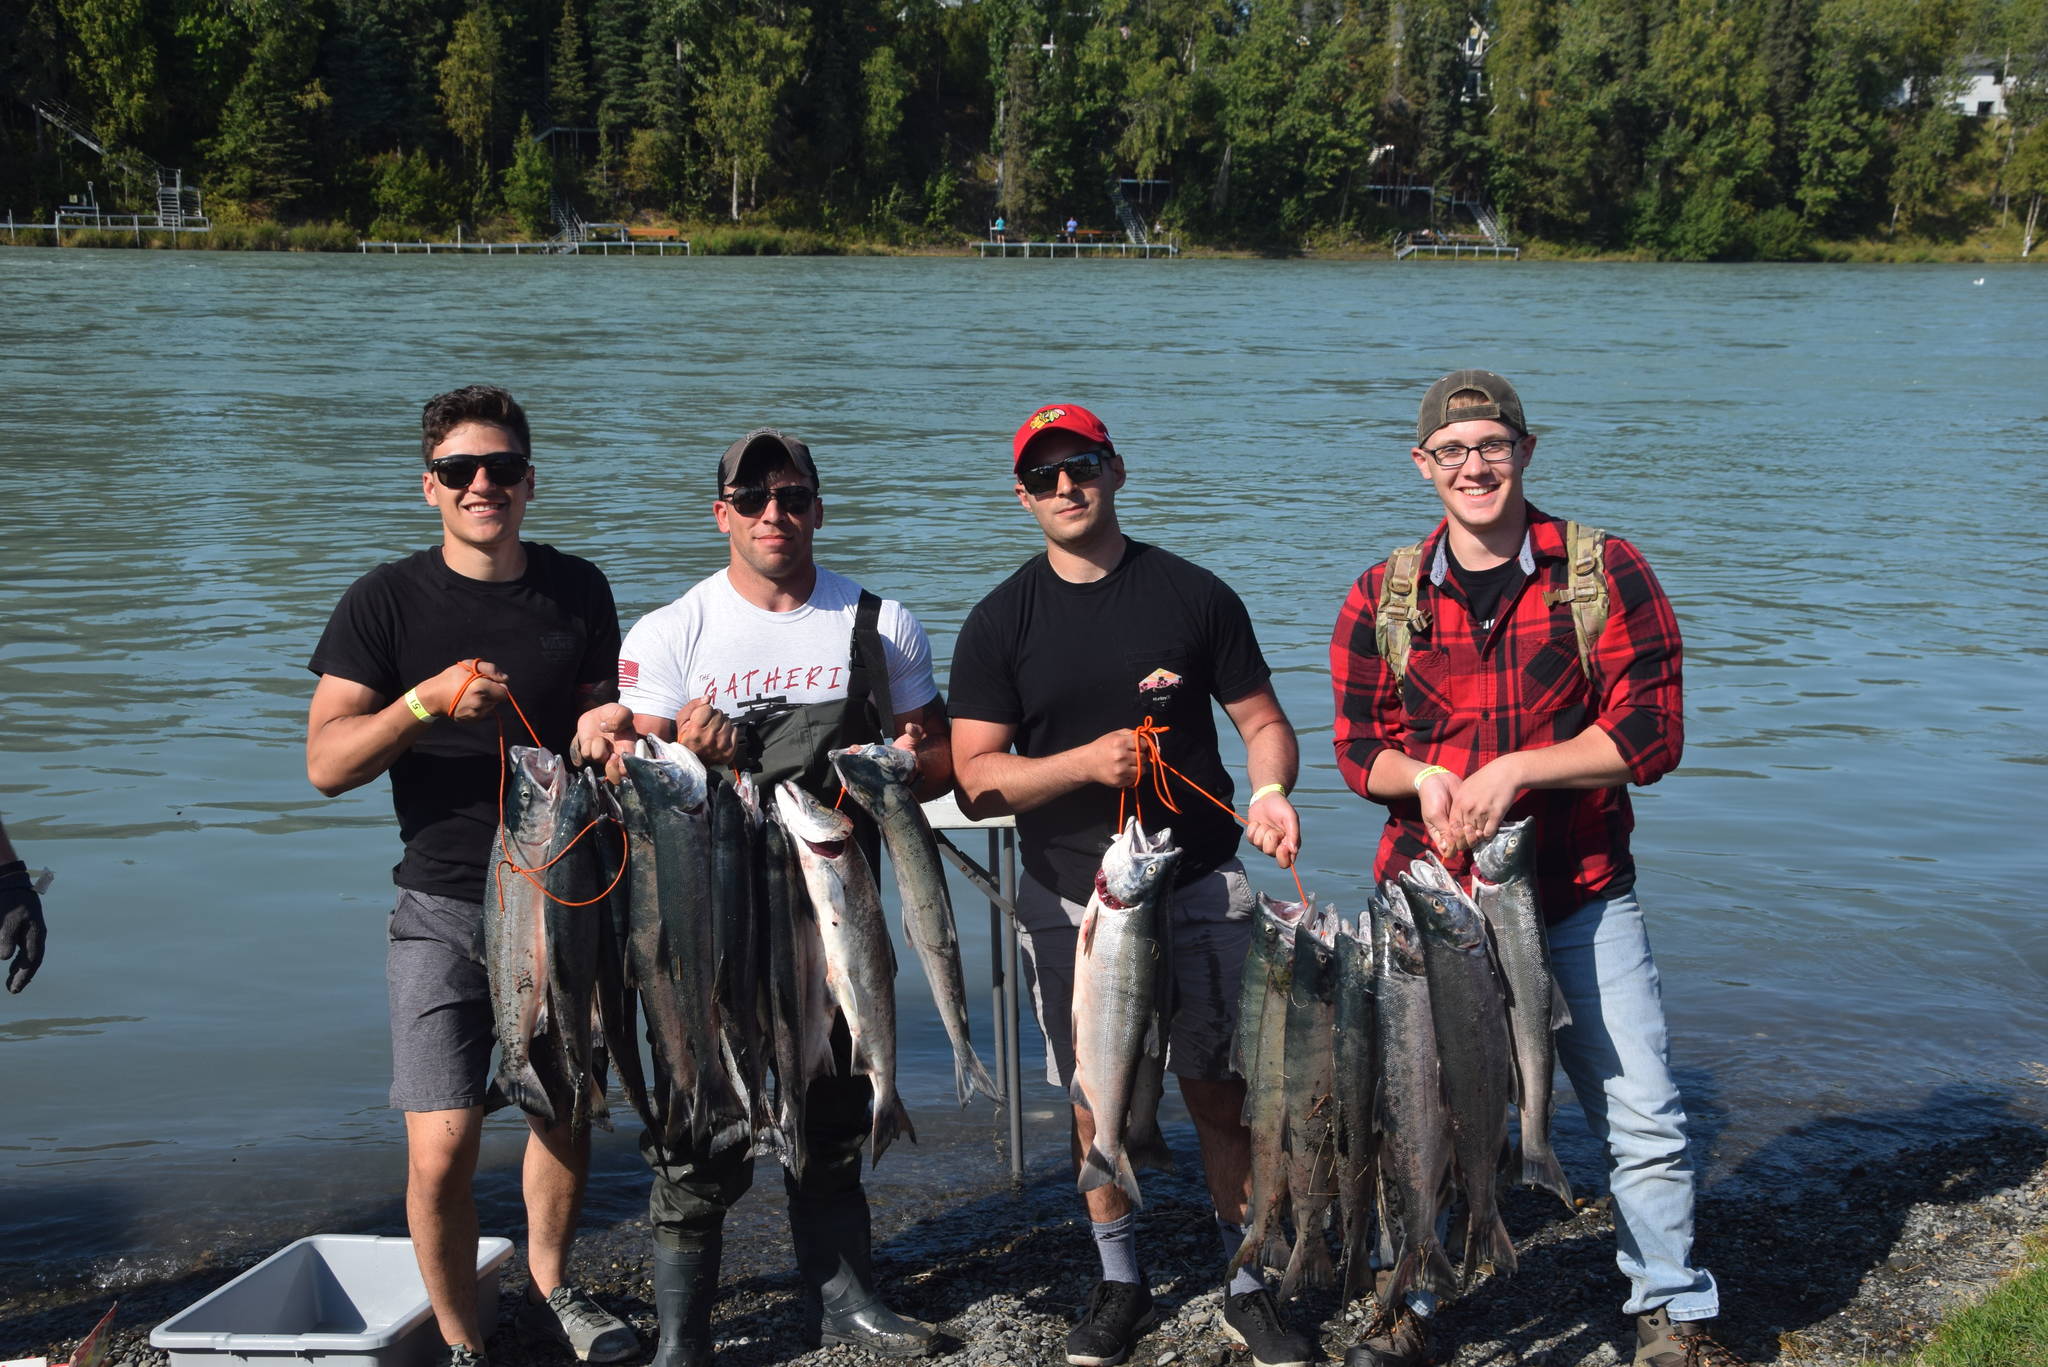 From left, Spc. Gabriel Rodriguez, Staff Sgt. David Wardlow, Spc. Tyler Vretenick and Spc. Ethan Holman show off the day’s haul during the Wounded Warrior’s Fishing Trip in Centennial Park in Soldotna, Alaska on Aug. 9, 2019. (Photo by Brian Mazurek)